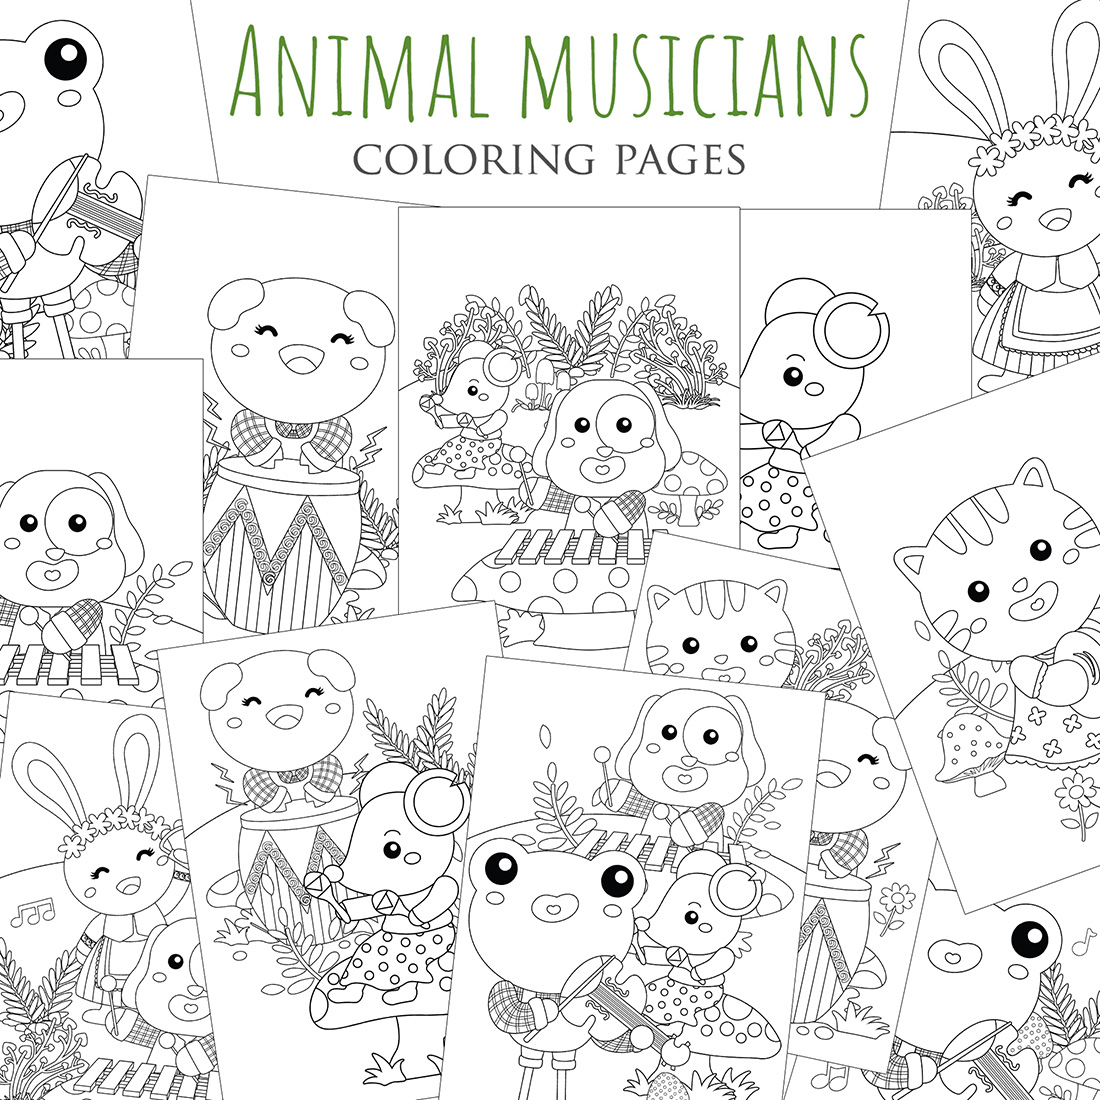 Colorful Cute and Funny Animal Musicians Playing Learning Performance Musical Instrumental Melody Sing Cartoon Coloring School Activity for Kids and Adult cover image.